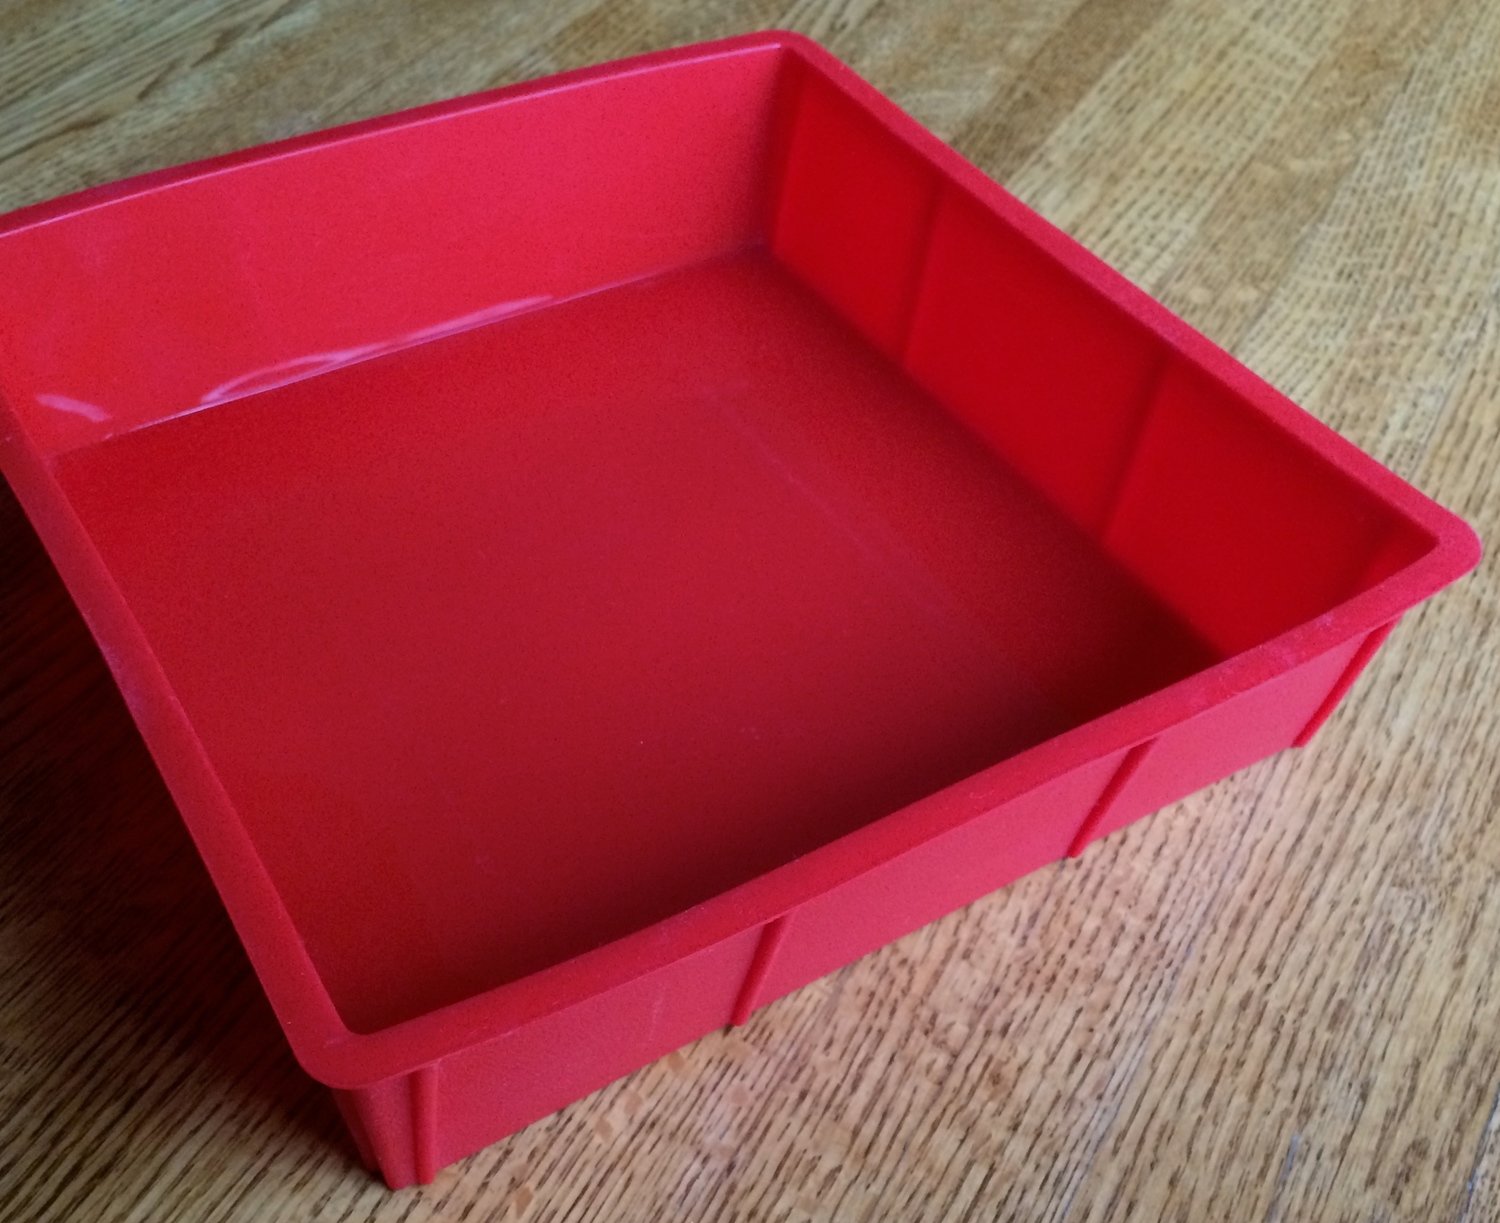 9-inch Square Silicone Baking Pan